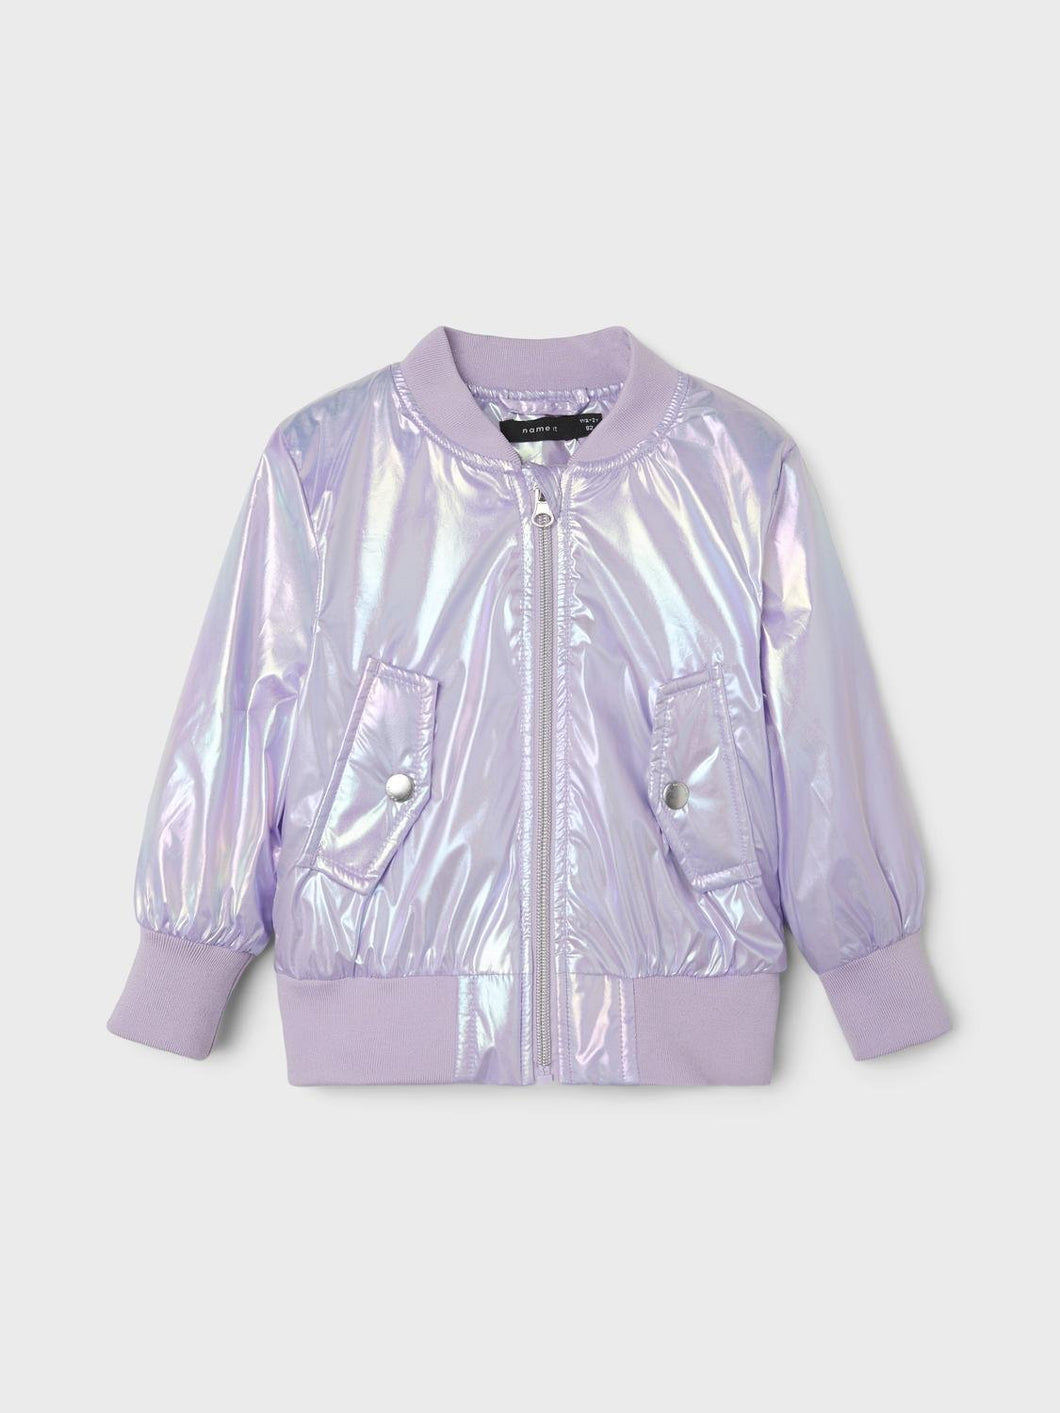 NMFMOVIE Outerwear - Orchid Bloom